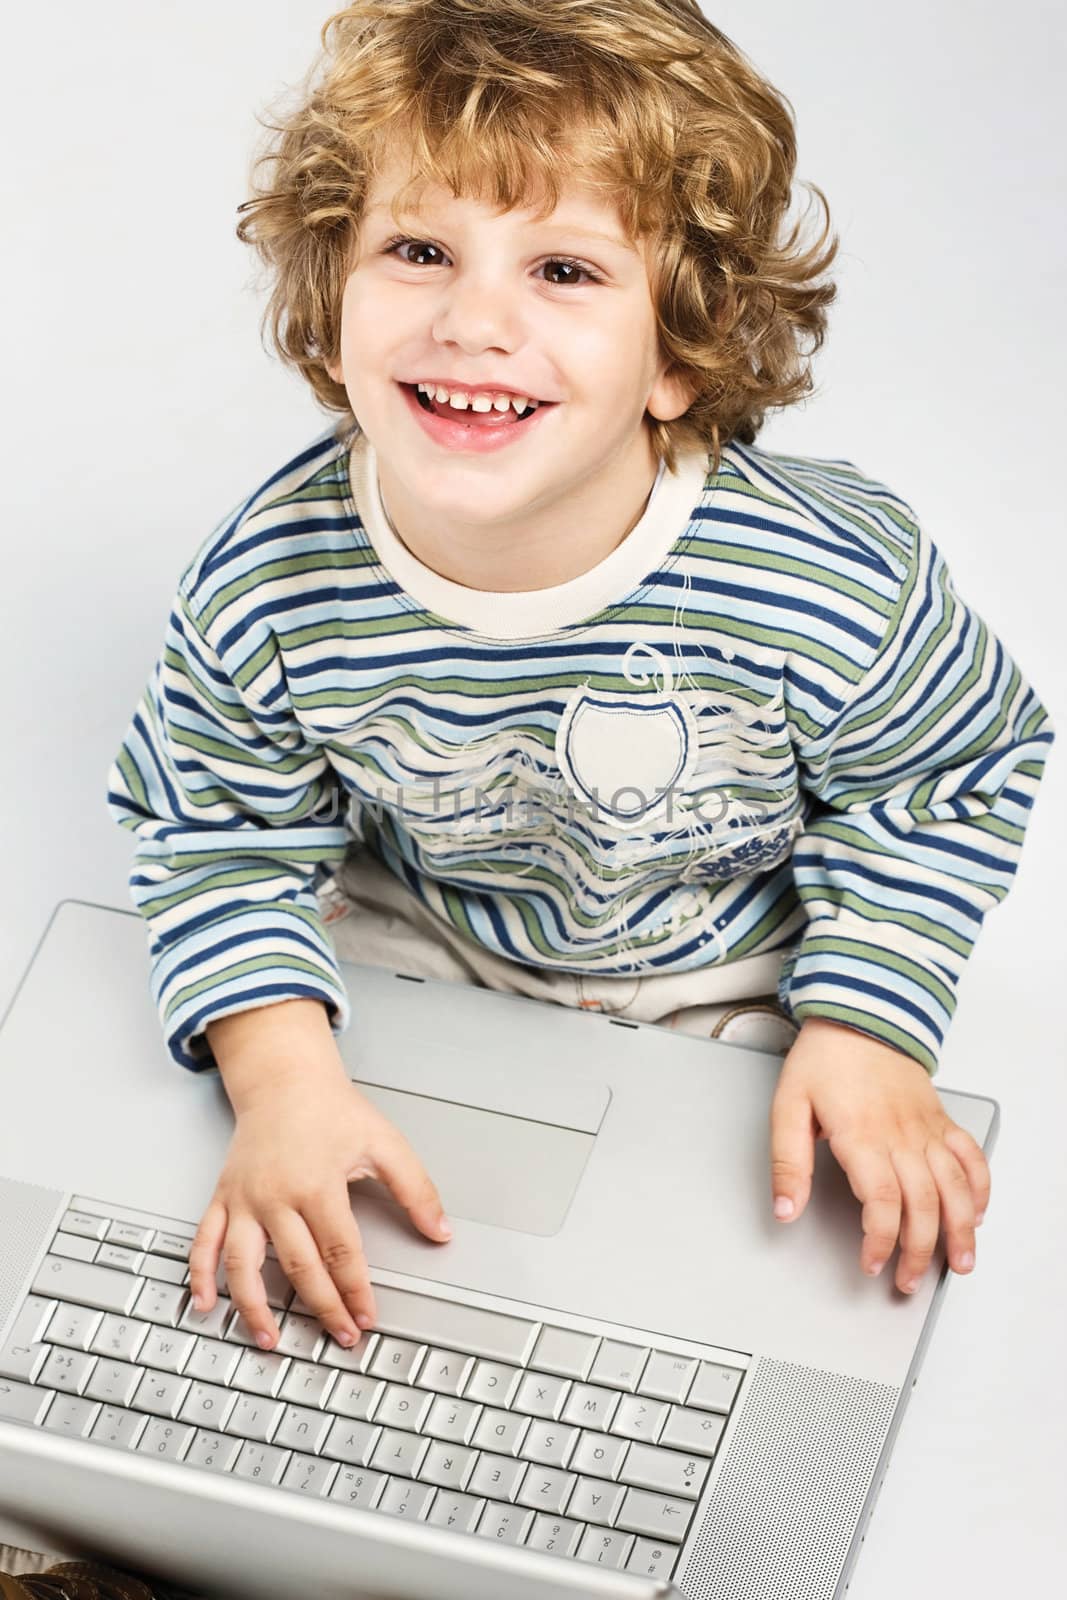 boy holding laptop and smiling by imarin